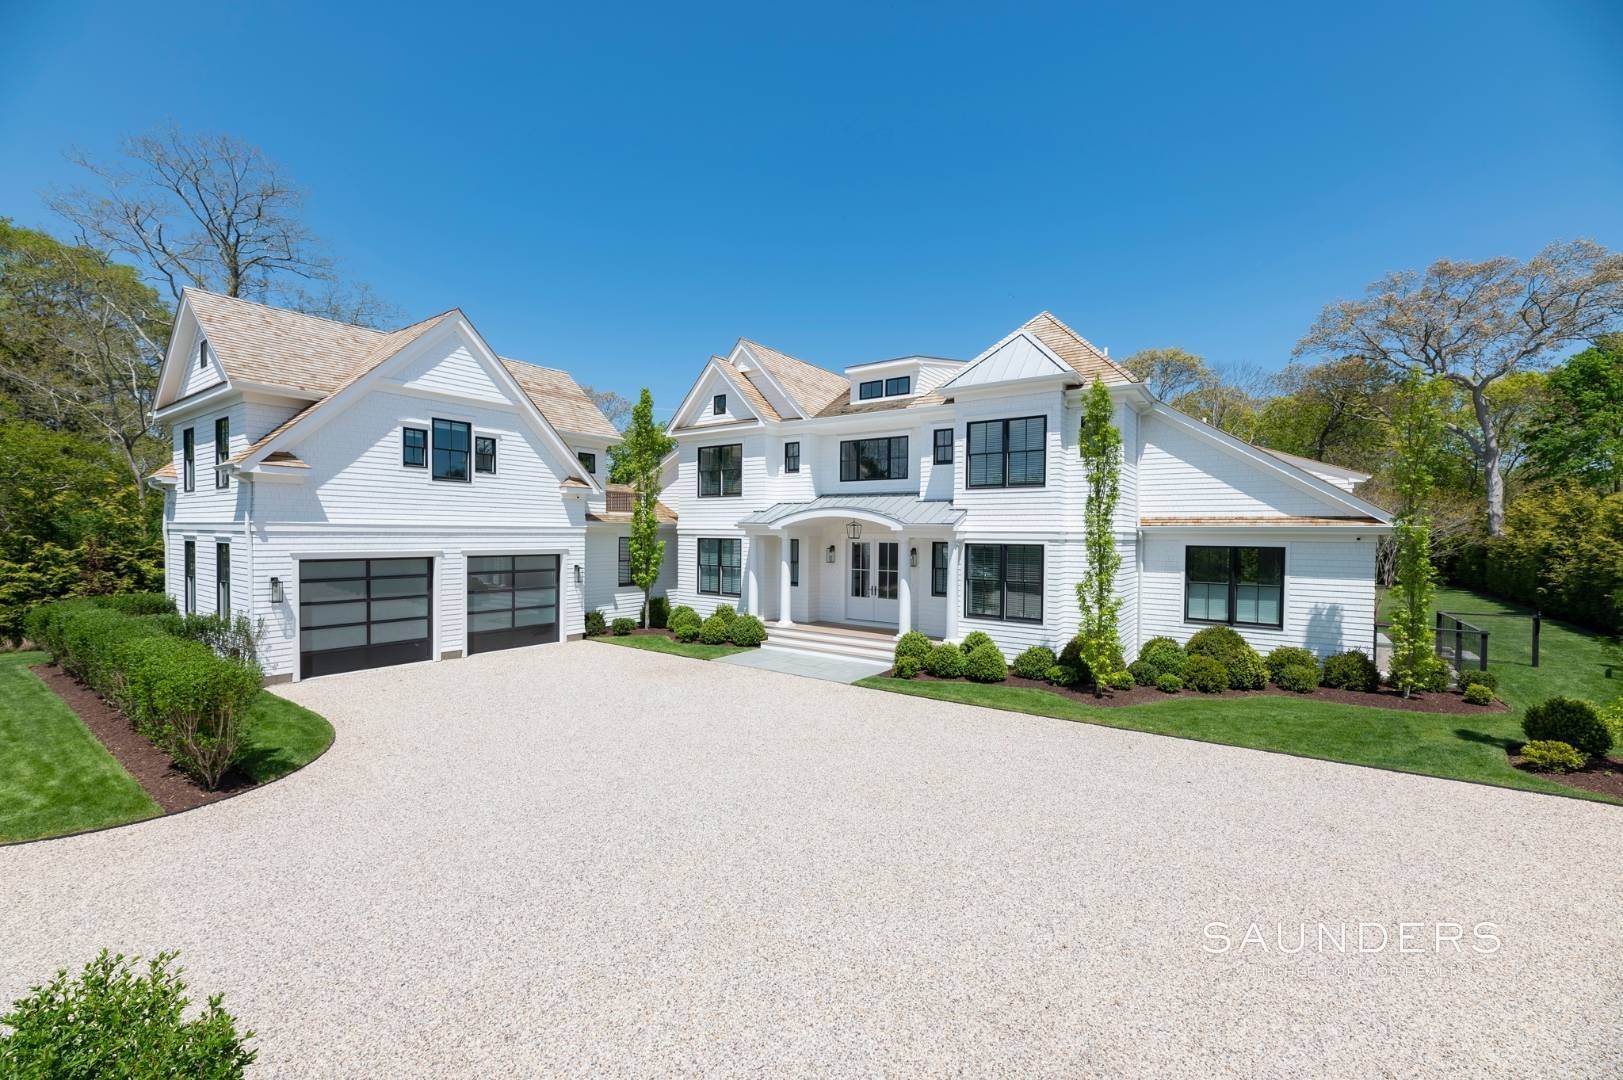 Single Family Homes at Pristine Private Retreat Steps To Whb Main Street 250 Mill Road, Westhampton Beach Village, NY 11978